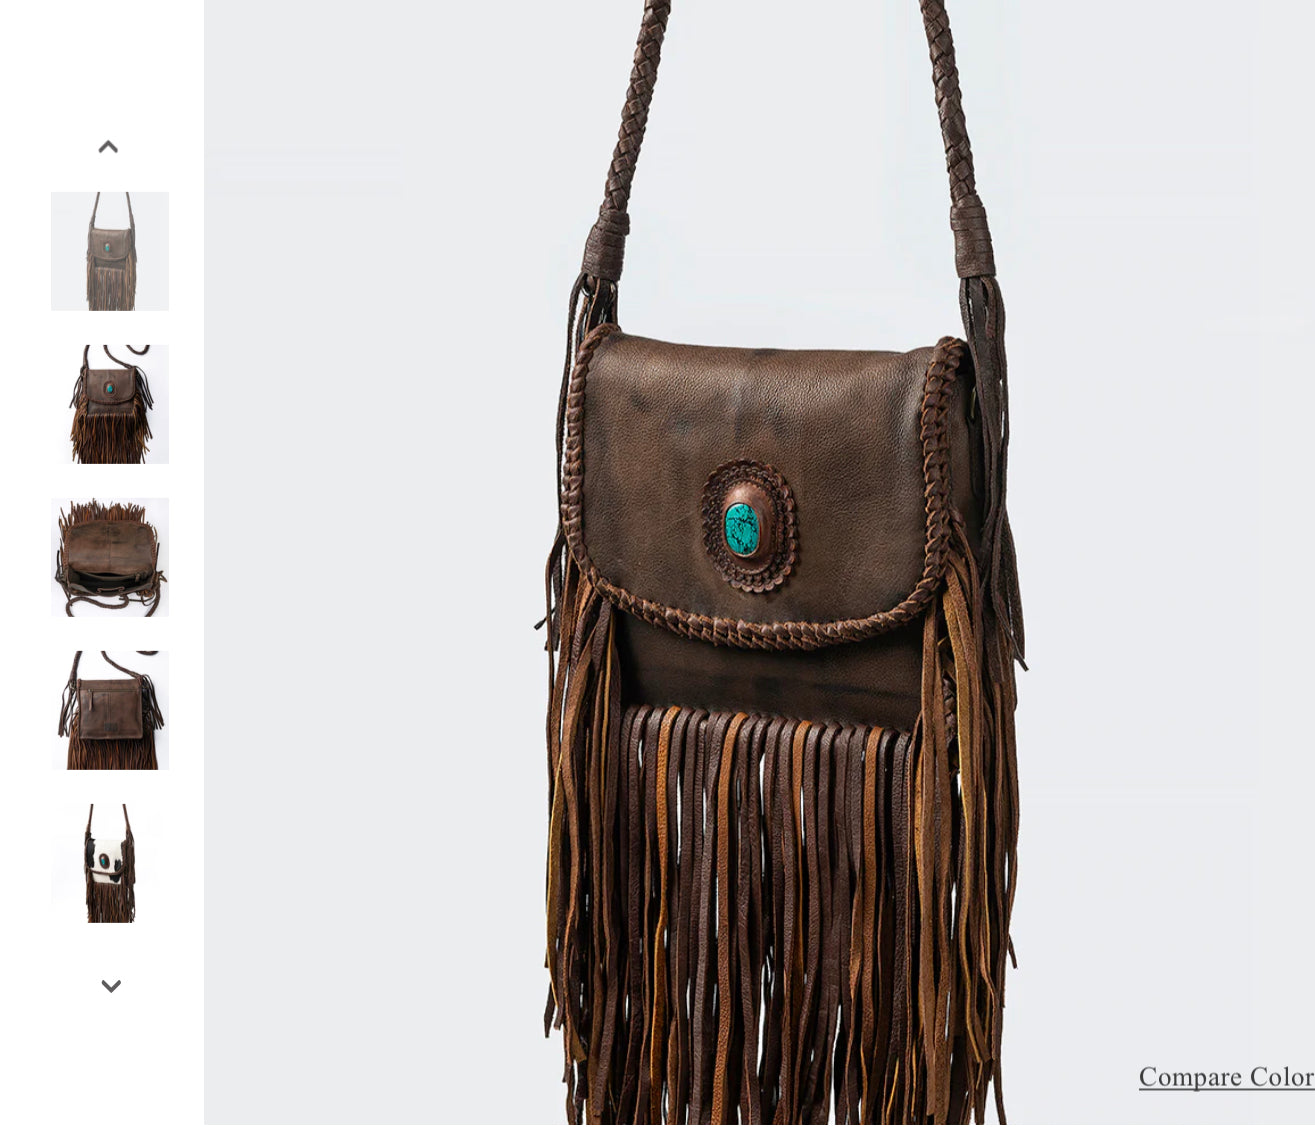 AMERICAN DARLING HEAVILY FRINGED LEATHER PURSE WITH TURQUOISE OVAL